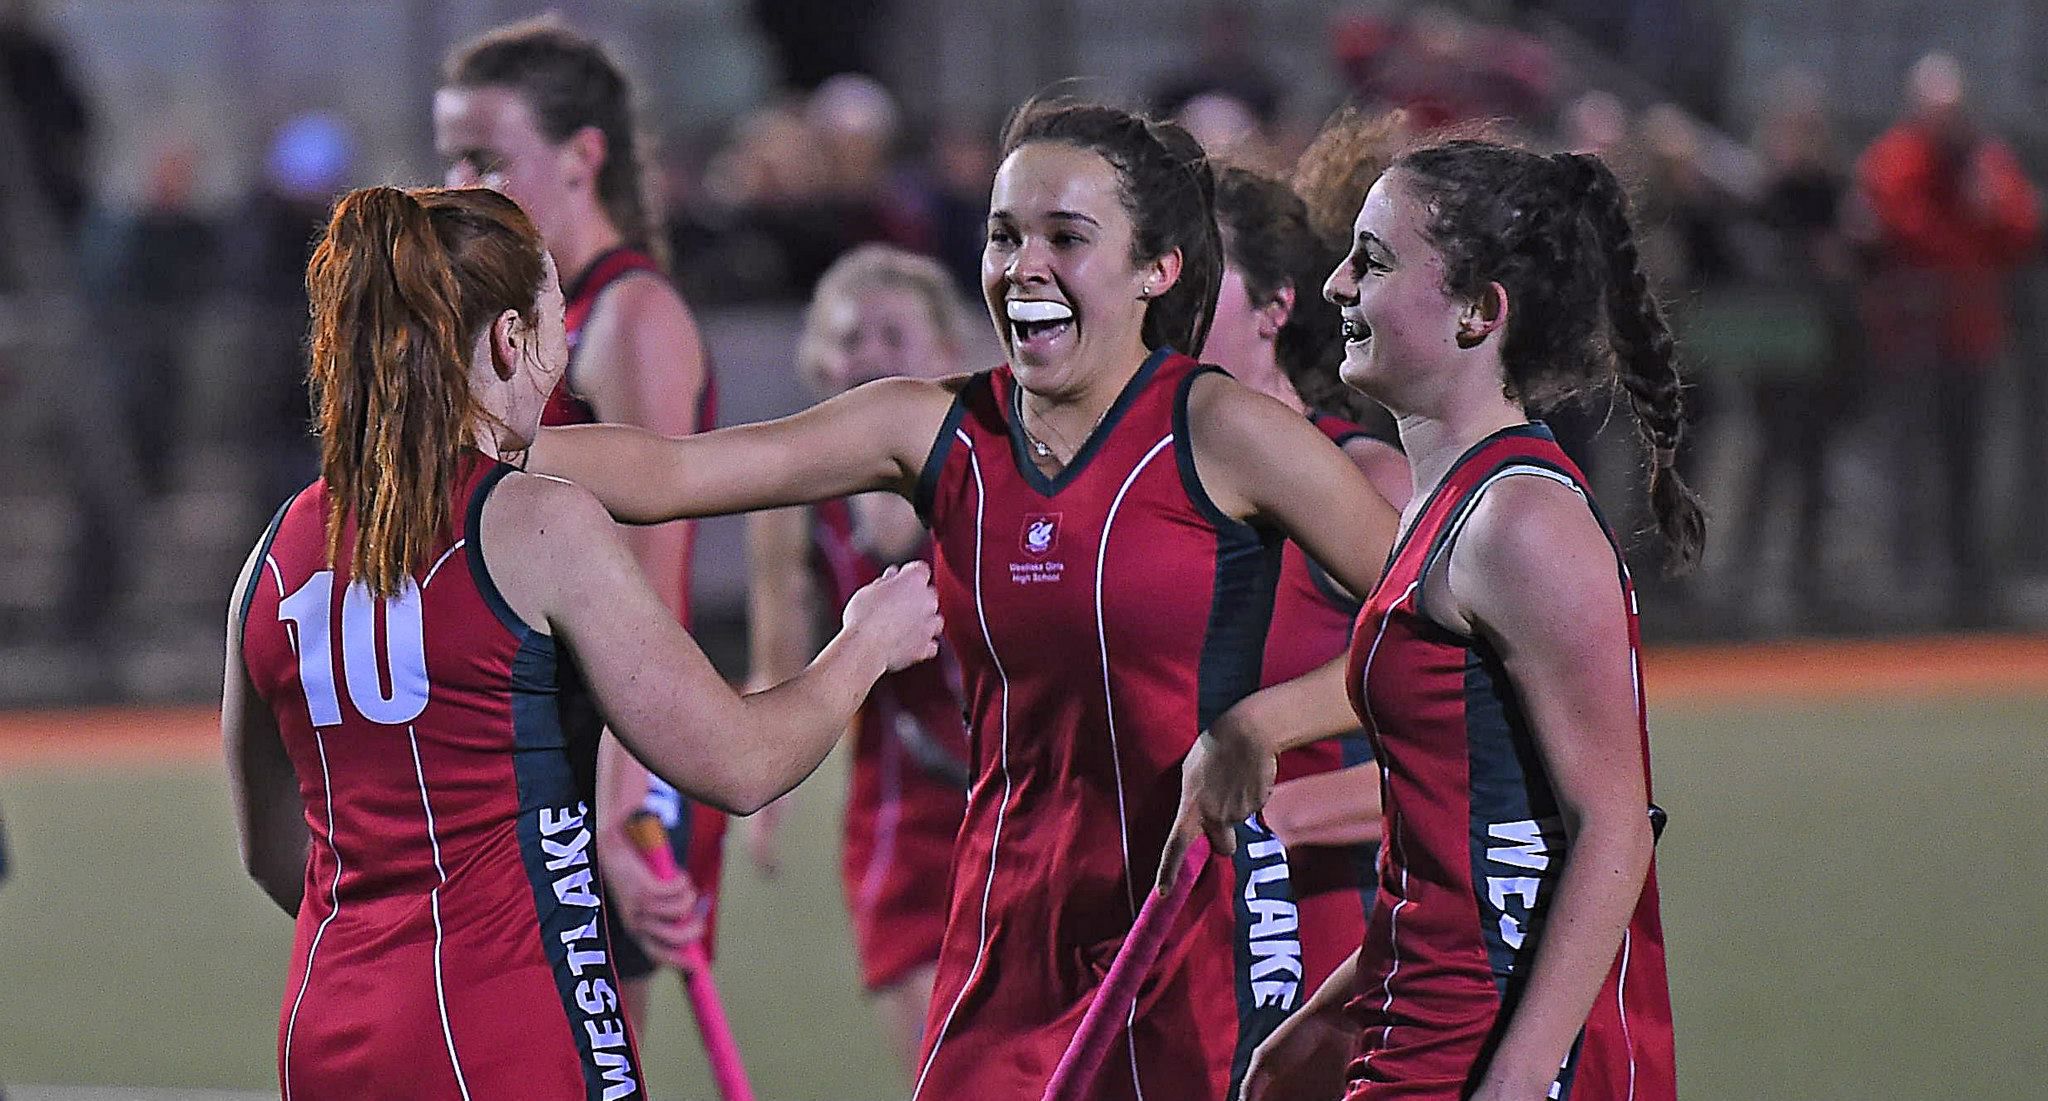 PHOTOS: The NZ's Harrison Sisters - Two of the most talented Blacksticks